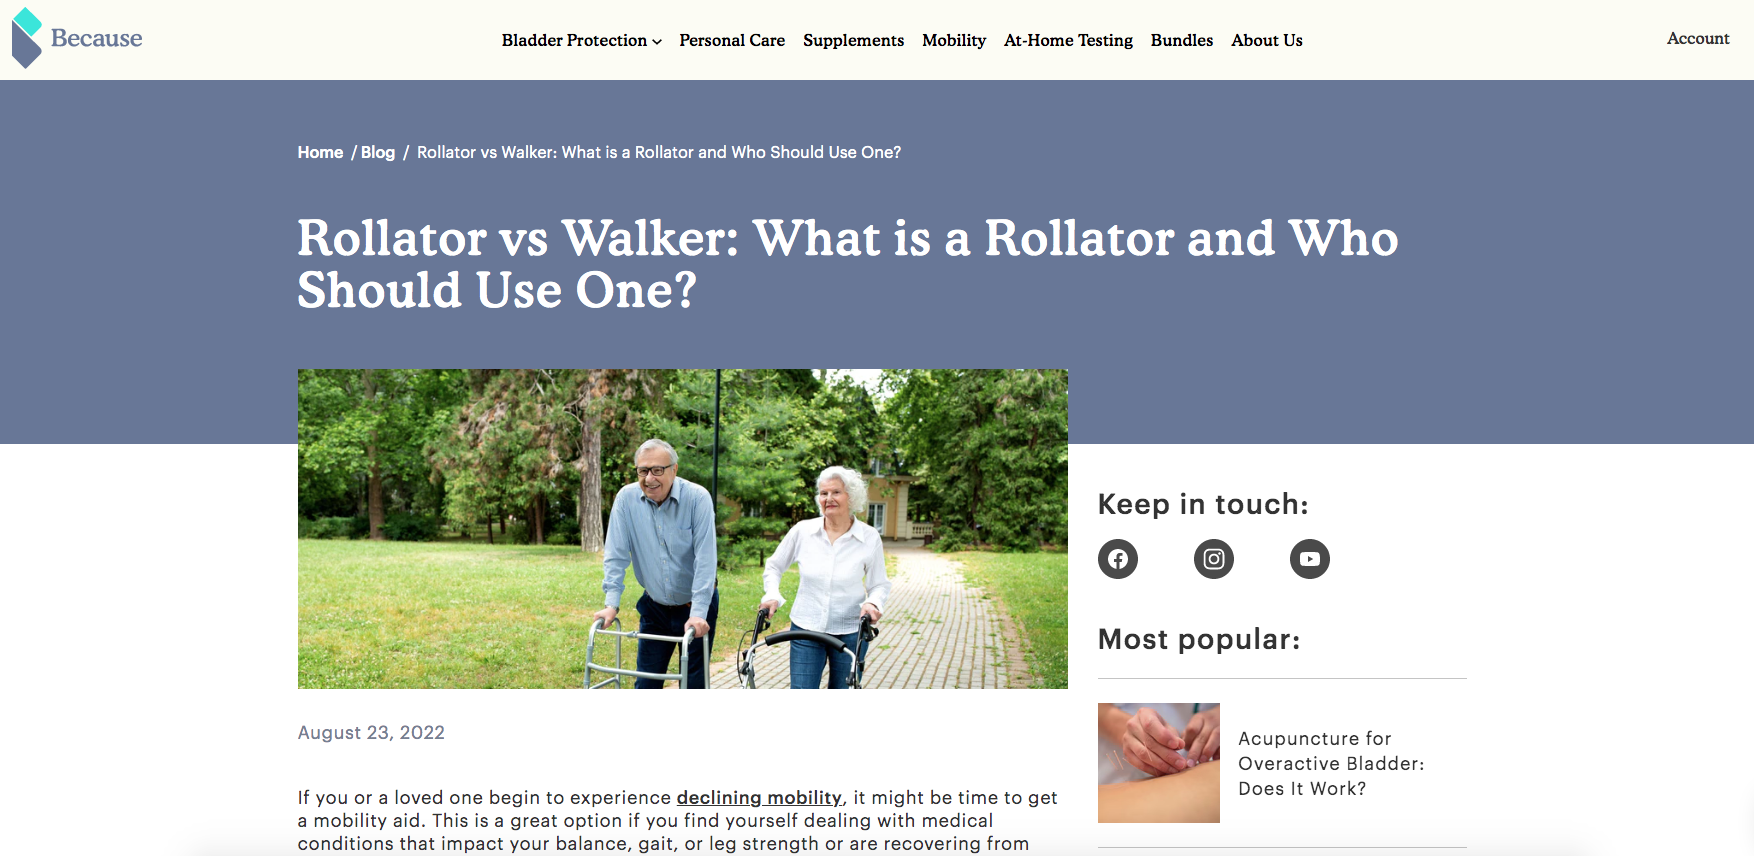 Rollator-vs-Walker.-What-is-a-Rollator-and-Who-Should-Use-One